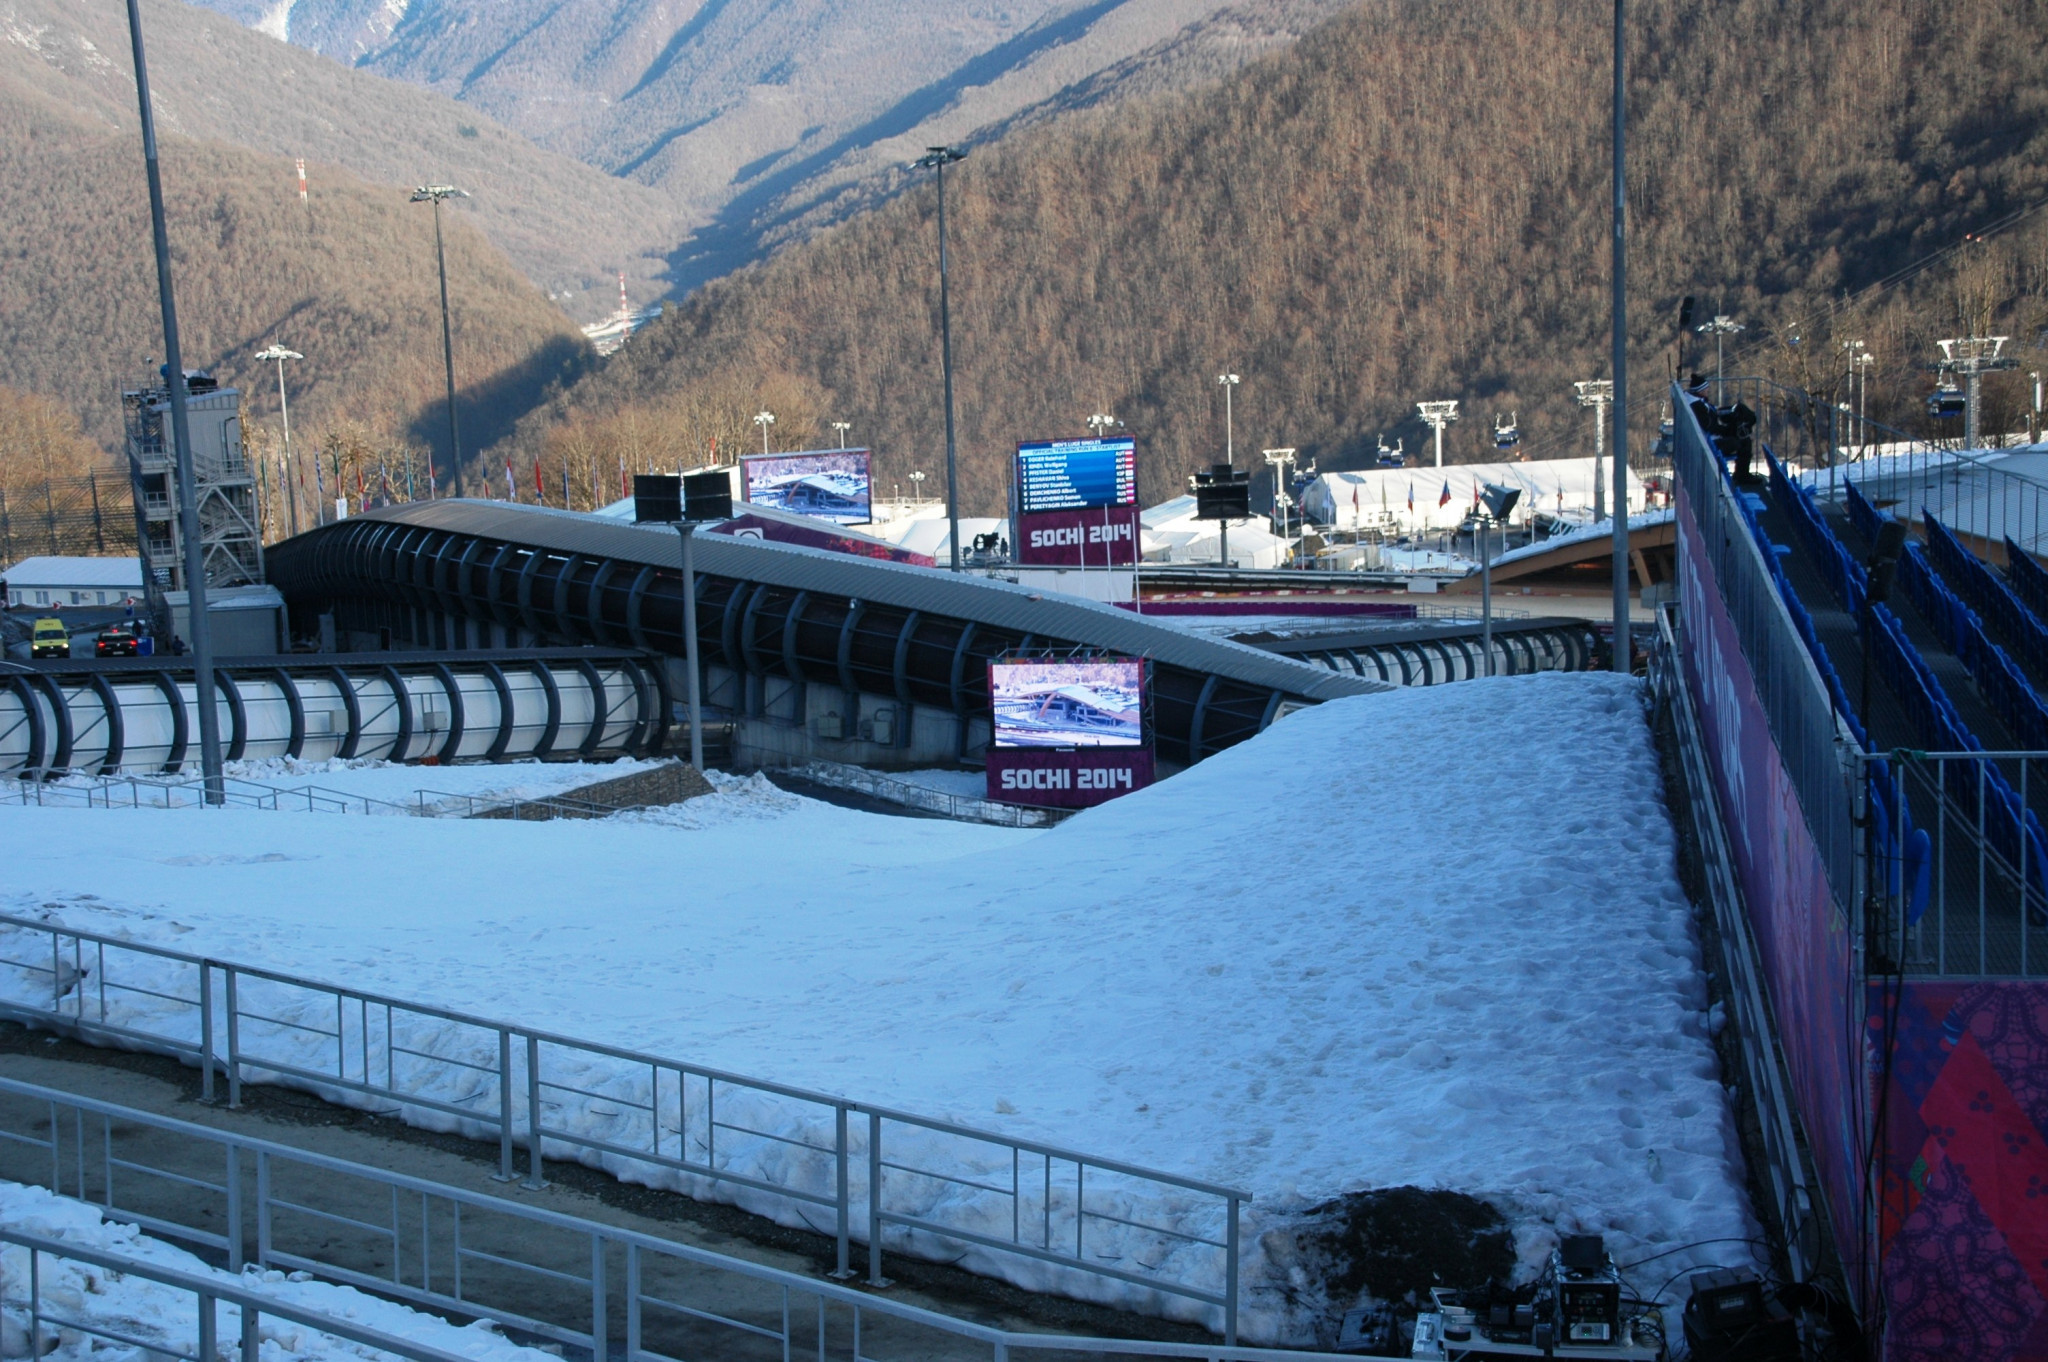 Sochi, host of the 2014 Winter Olympic and Paralympic Games, will stage the 2020 edition of the FIL World Championships ©FIL